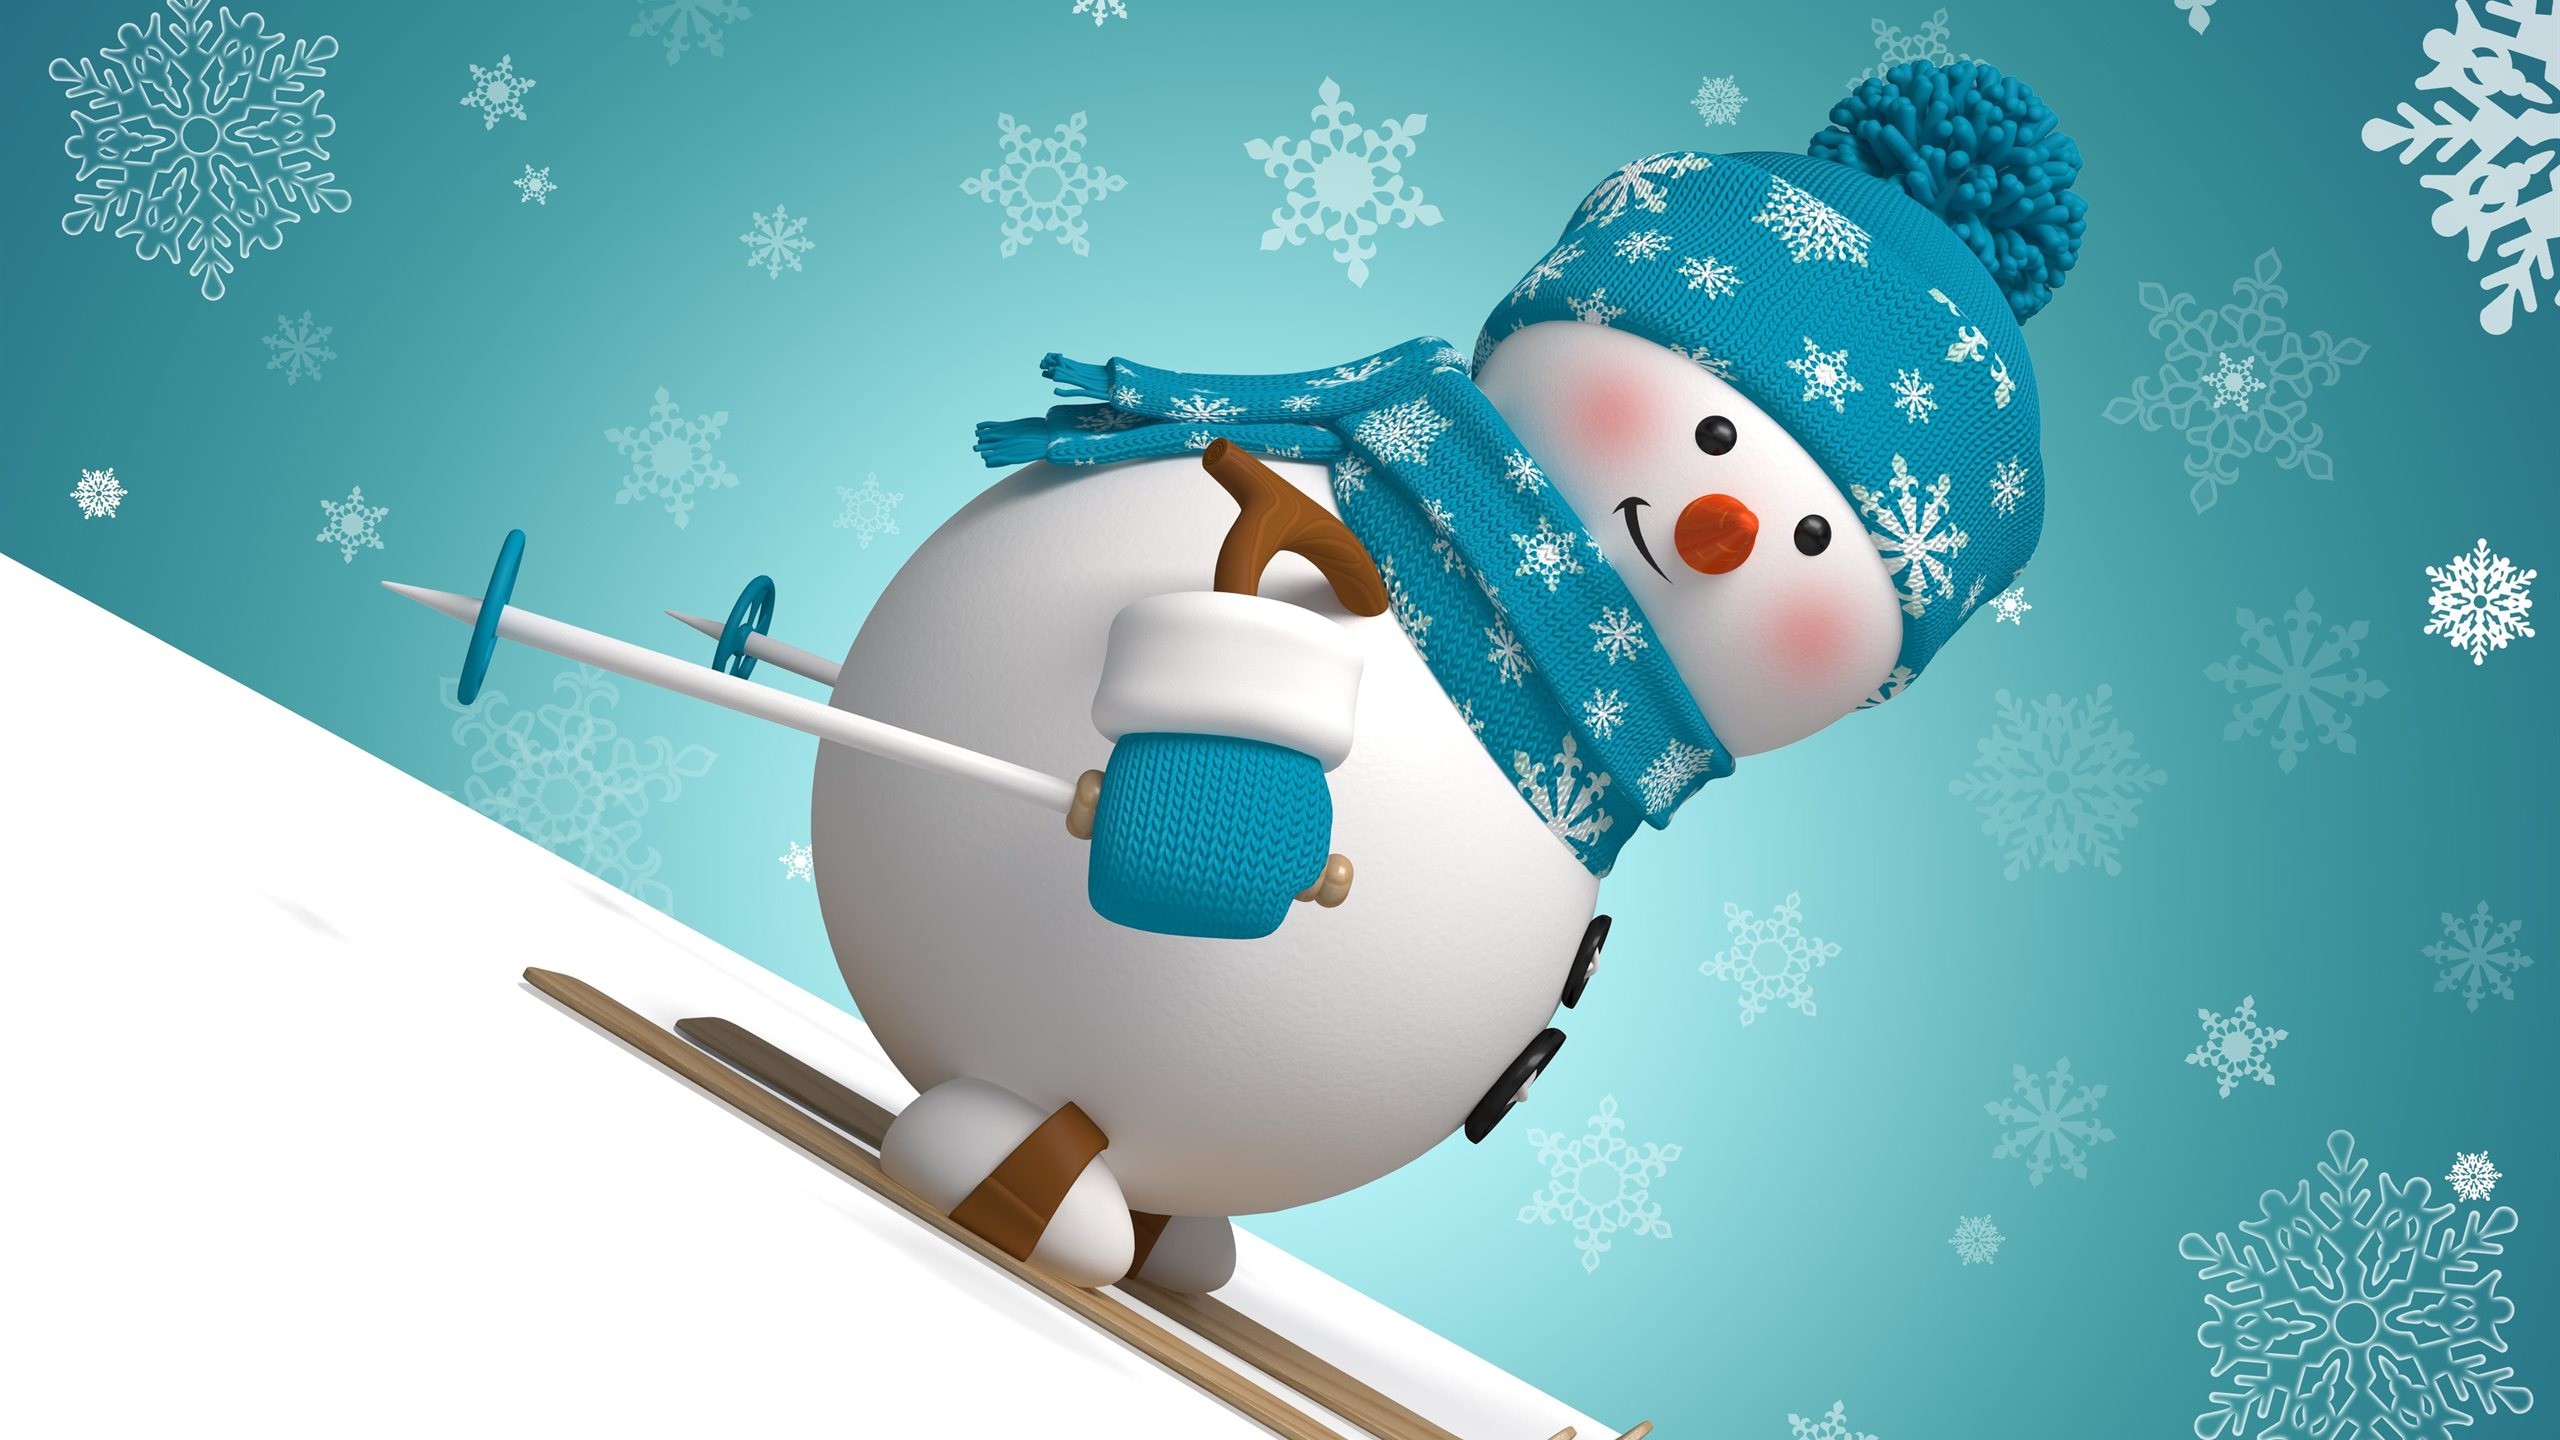 2560x1440 Snowman Wallpapers | HD Wallpapers Pulse Winter Snowman Wallpapers -  Wallpaper Cave ...